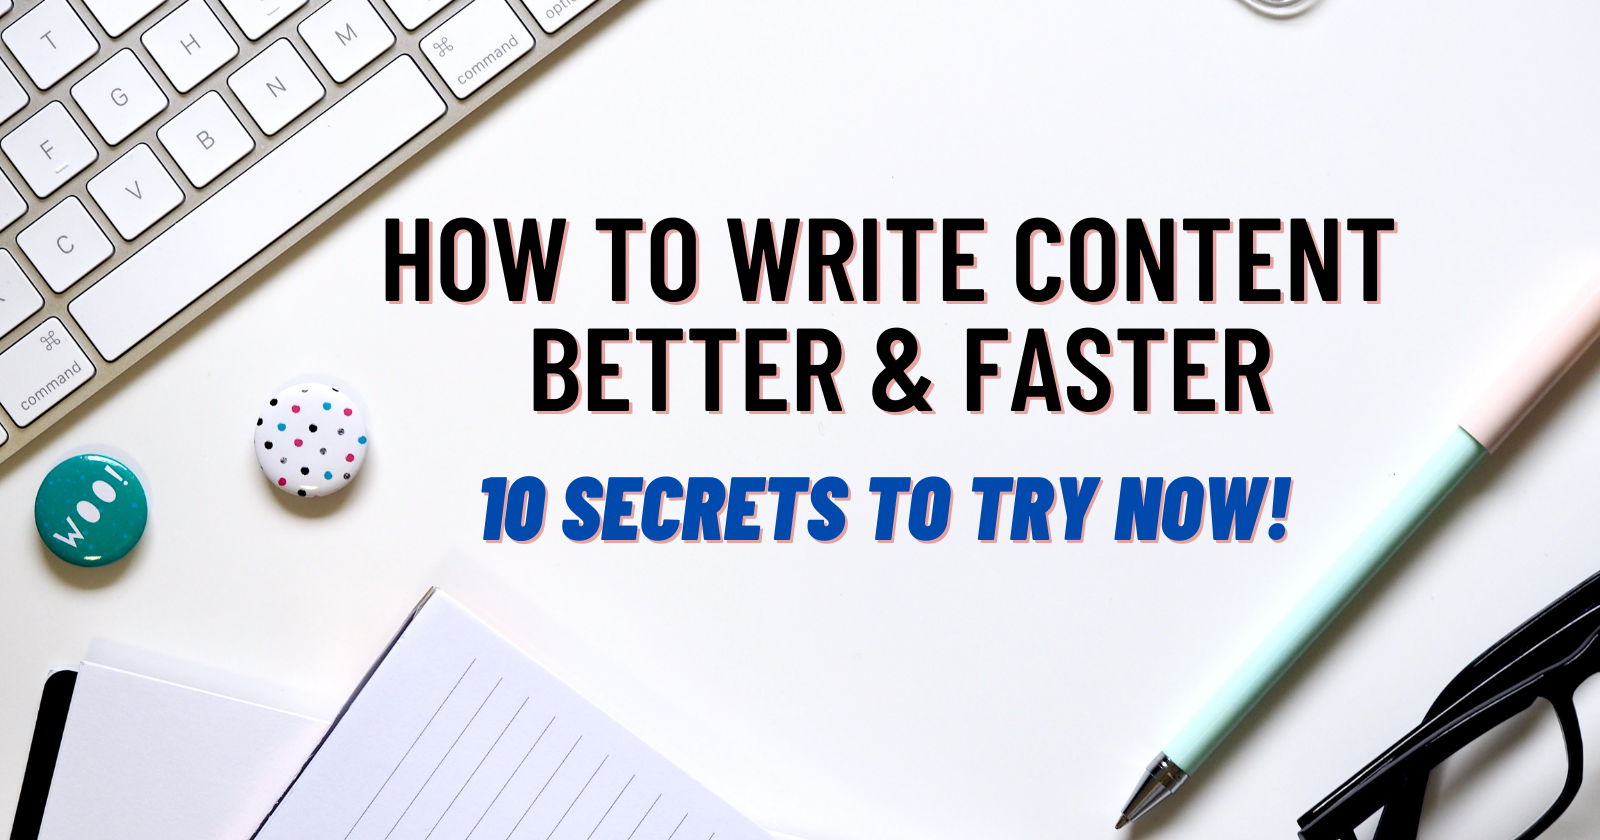 Write content, better and faster